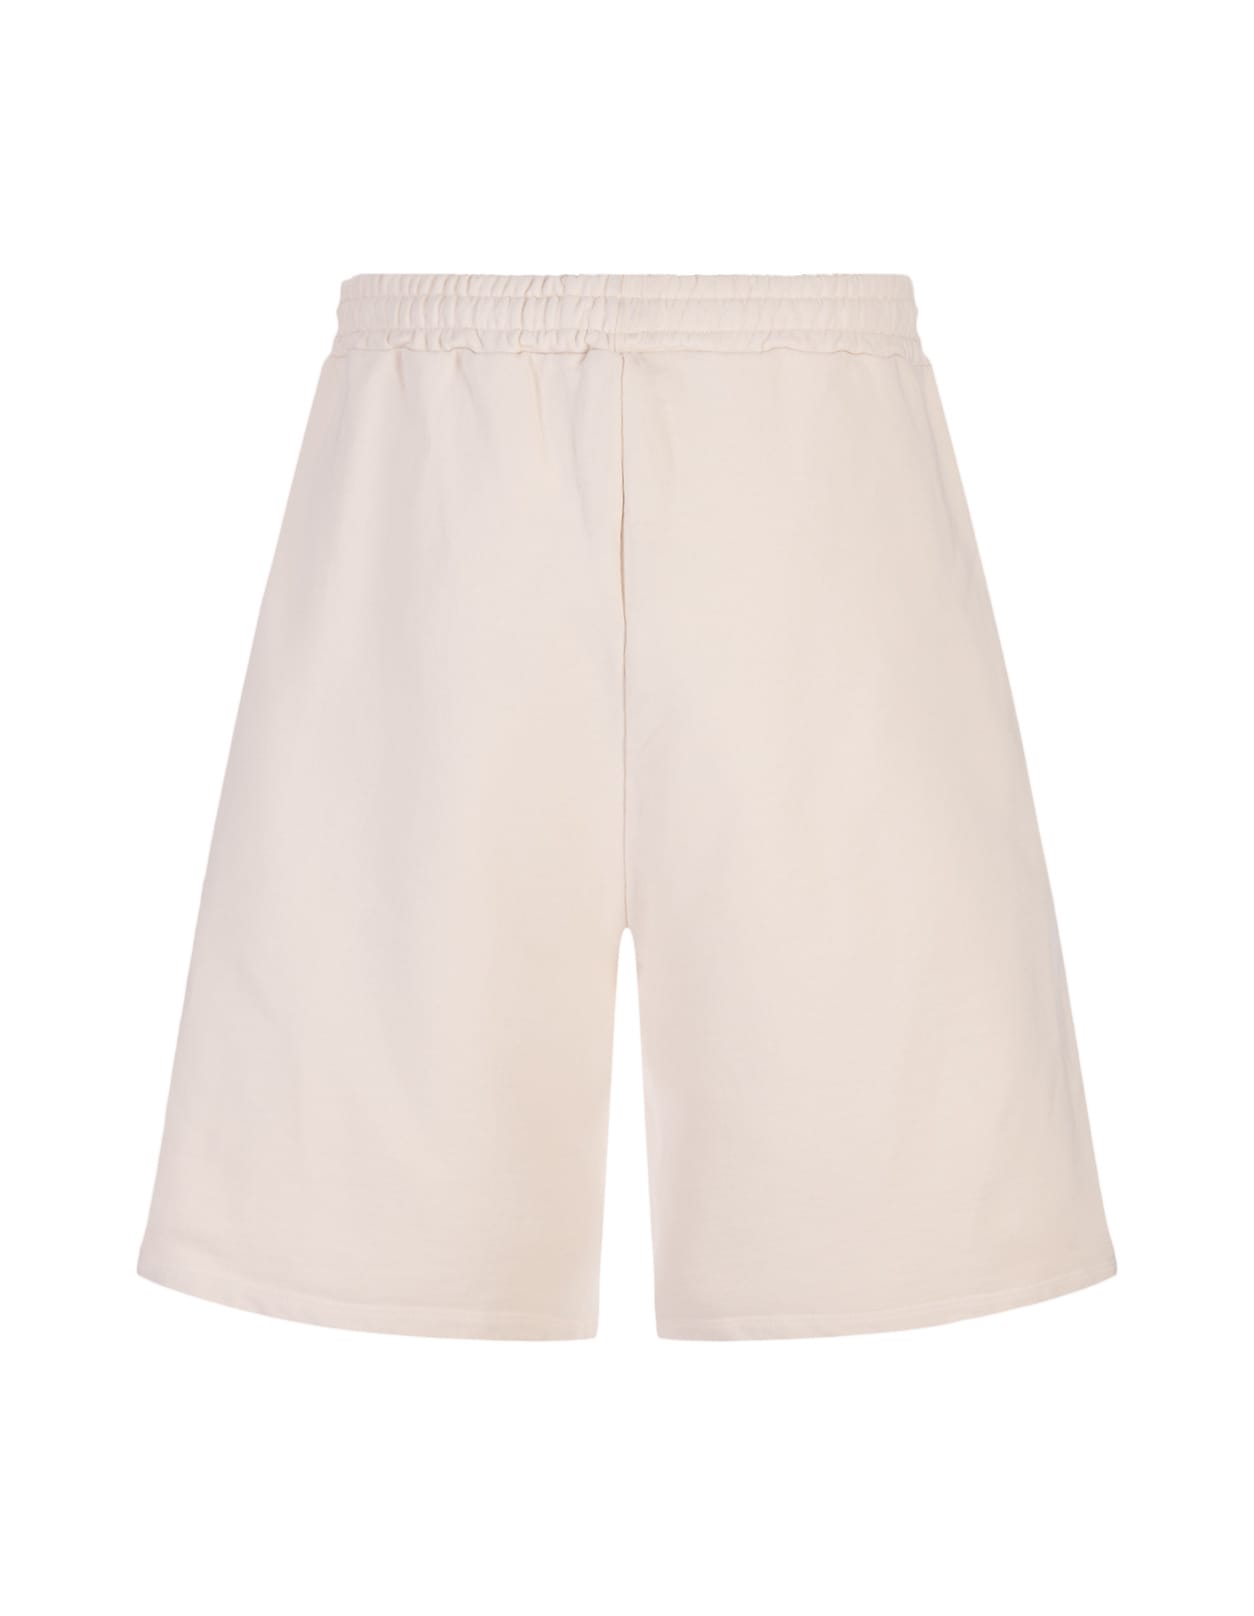 Shop Barrow Taupe Bermuda Shorts With Lettering Prints. In Brown